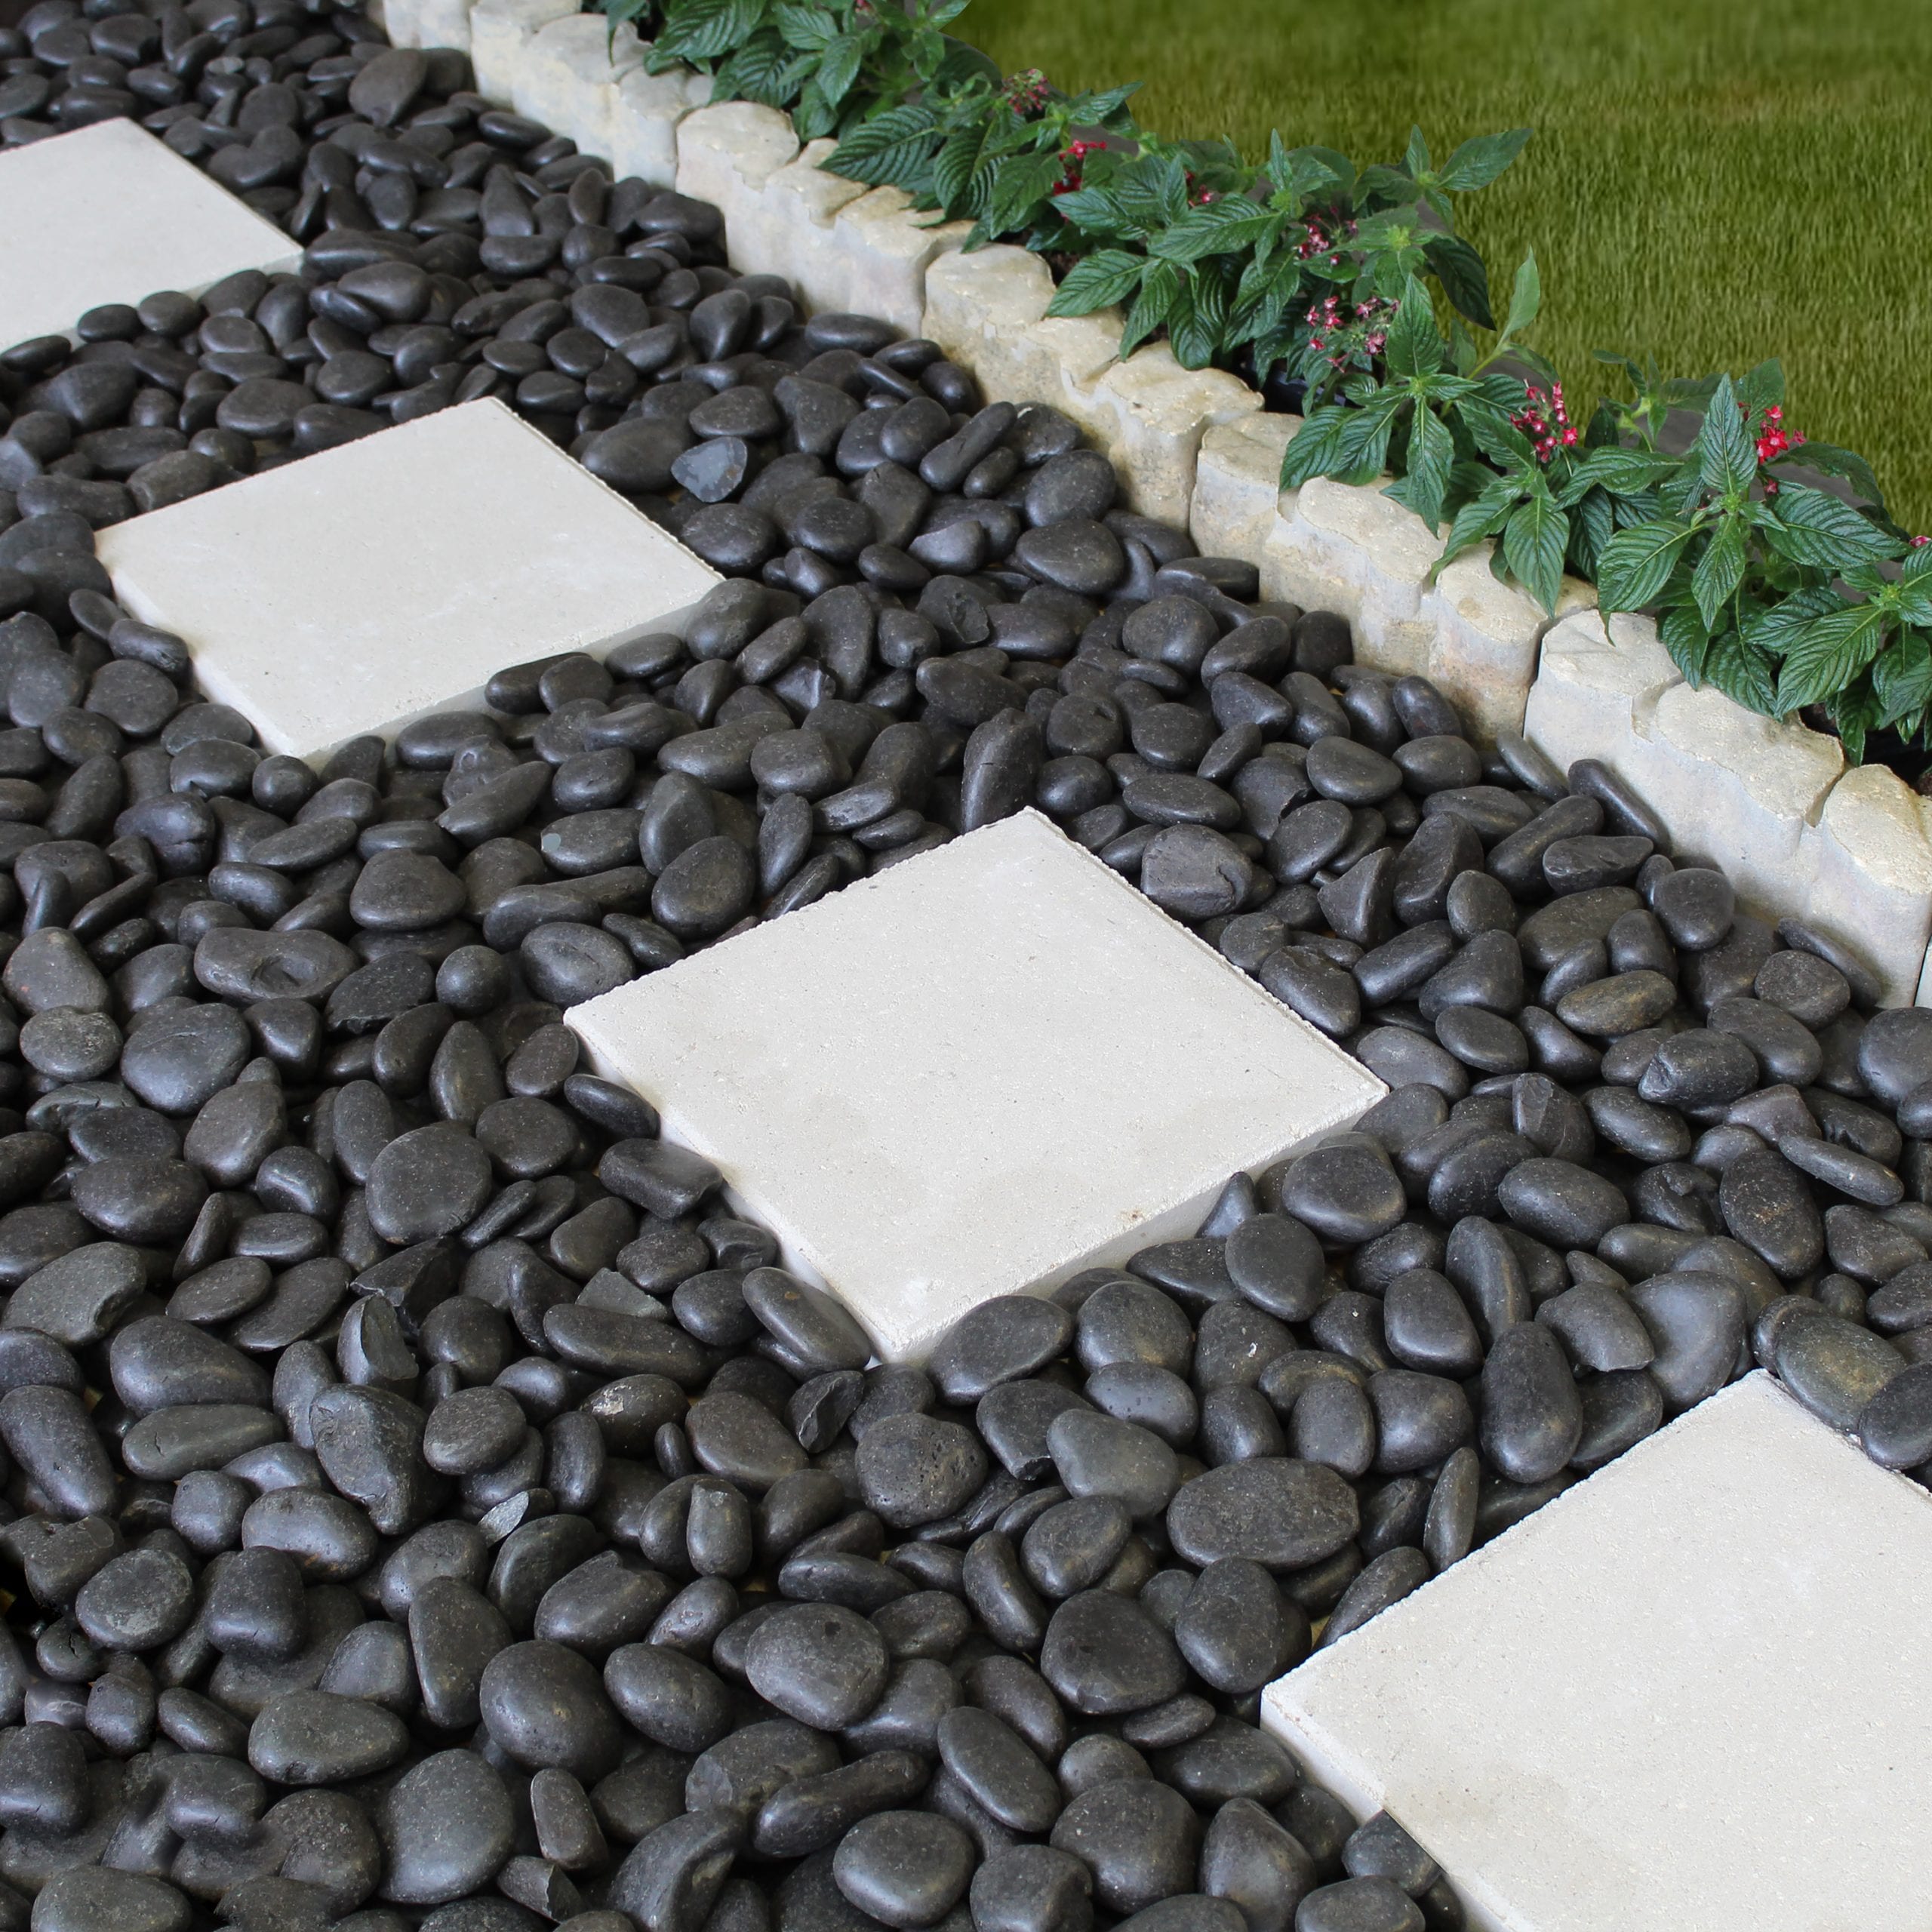 Polished Balck Decorative, Landscaping And Garden Stone Pebbles